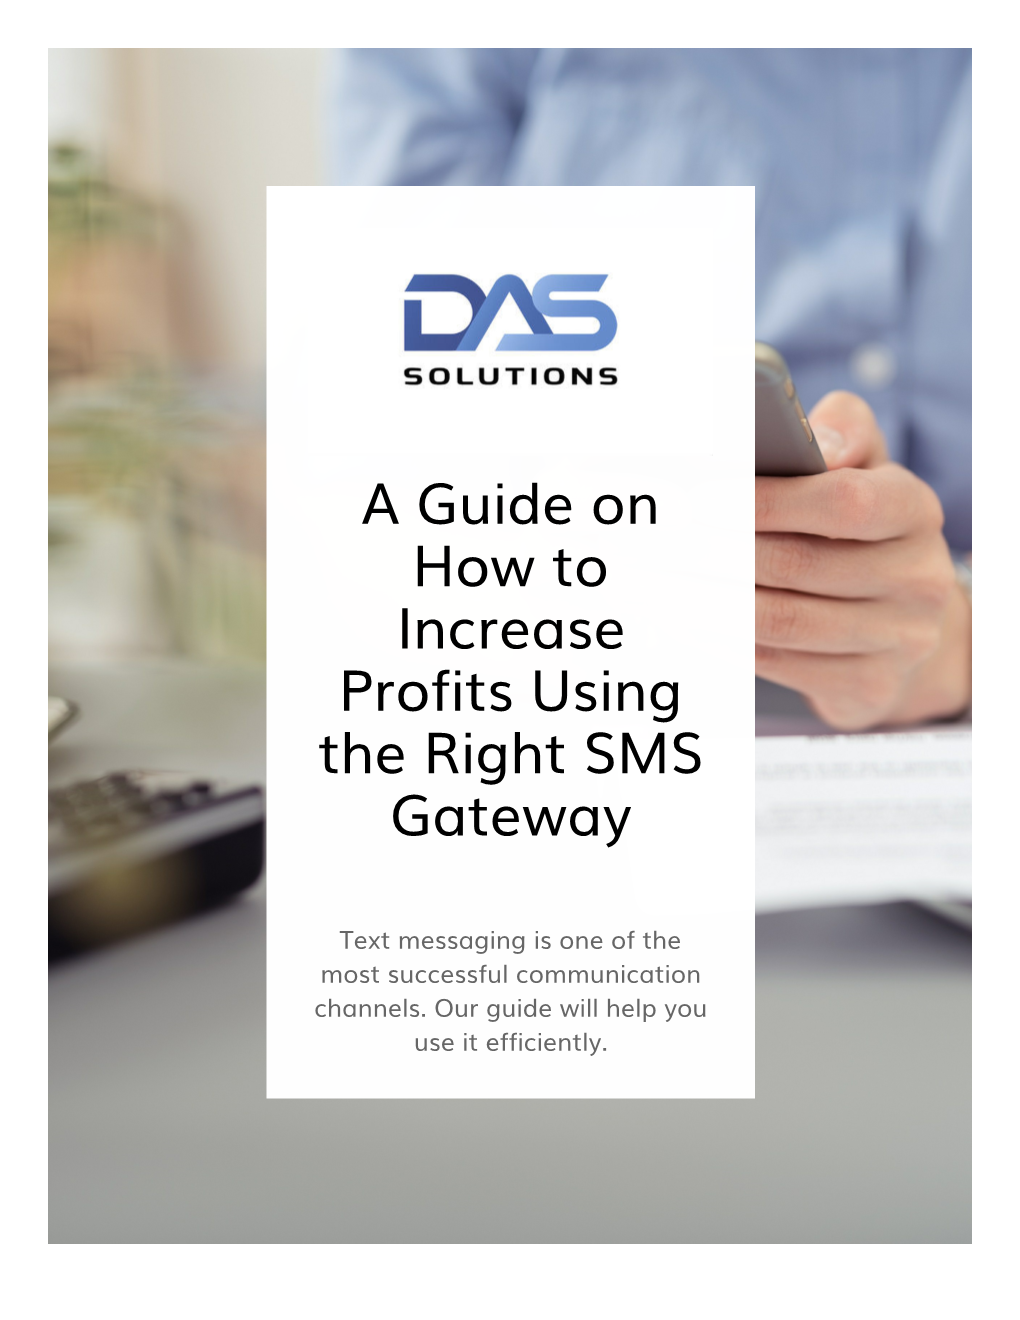 A Guide on How to Increase Profits Using the Right SMS Gateway